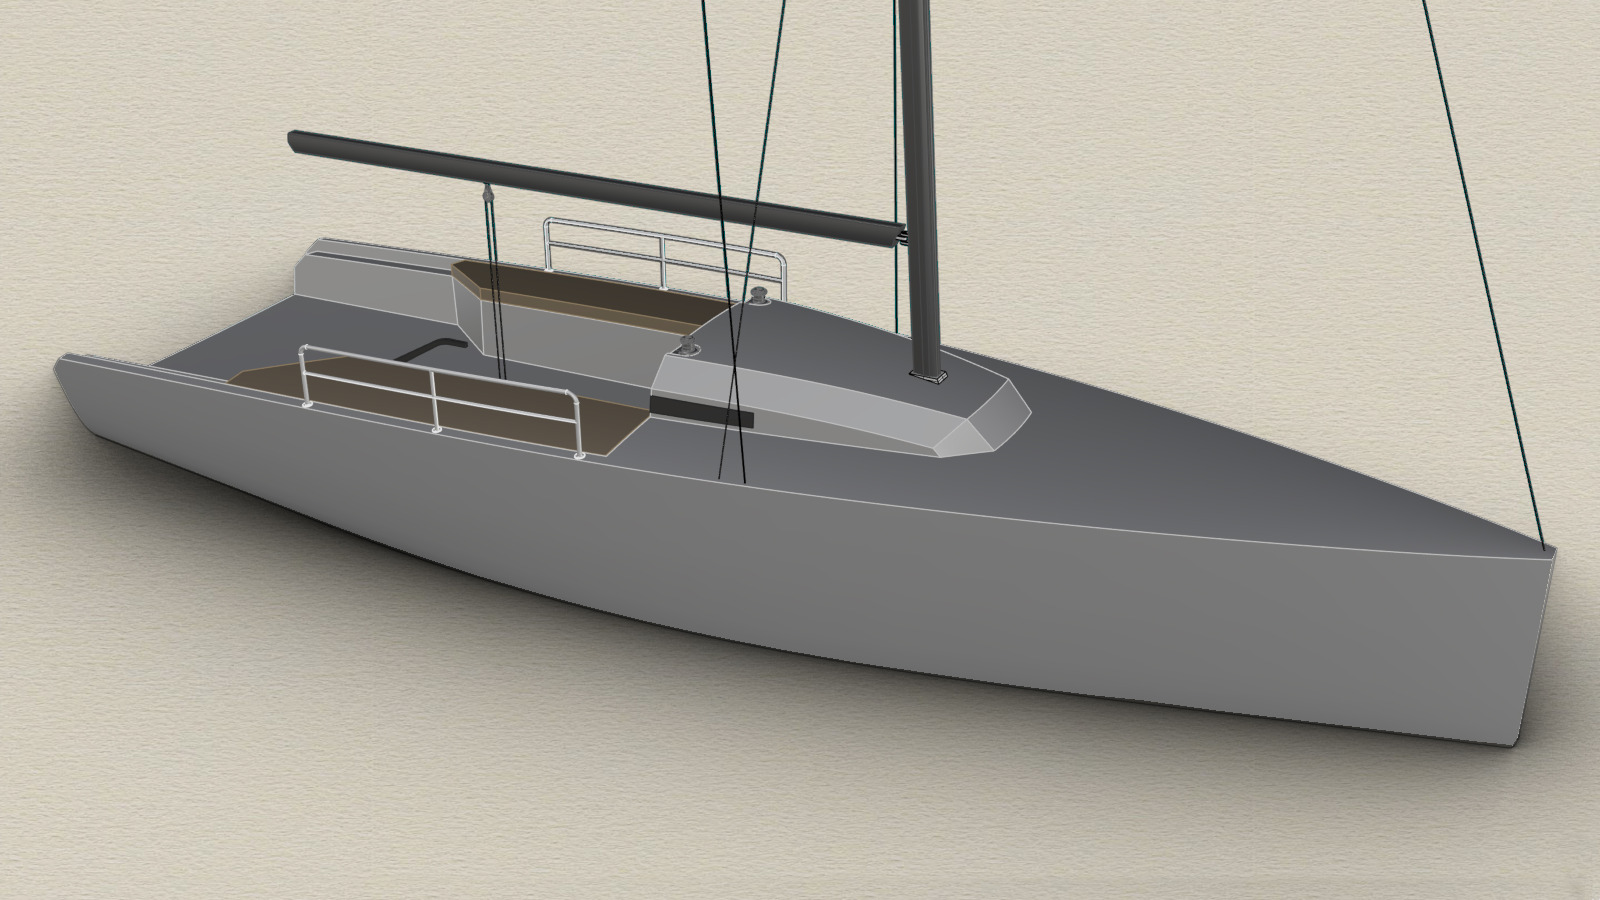 Yacht 3D Modeling with Rhino. Level 1